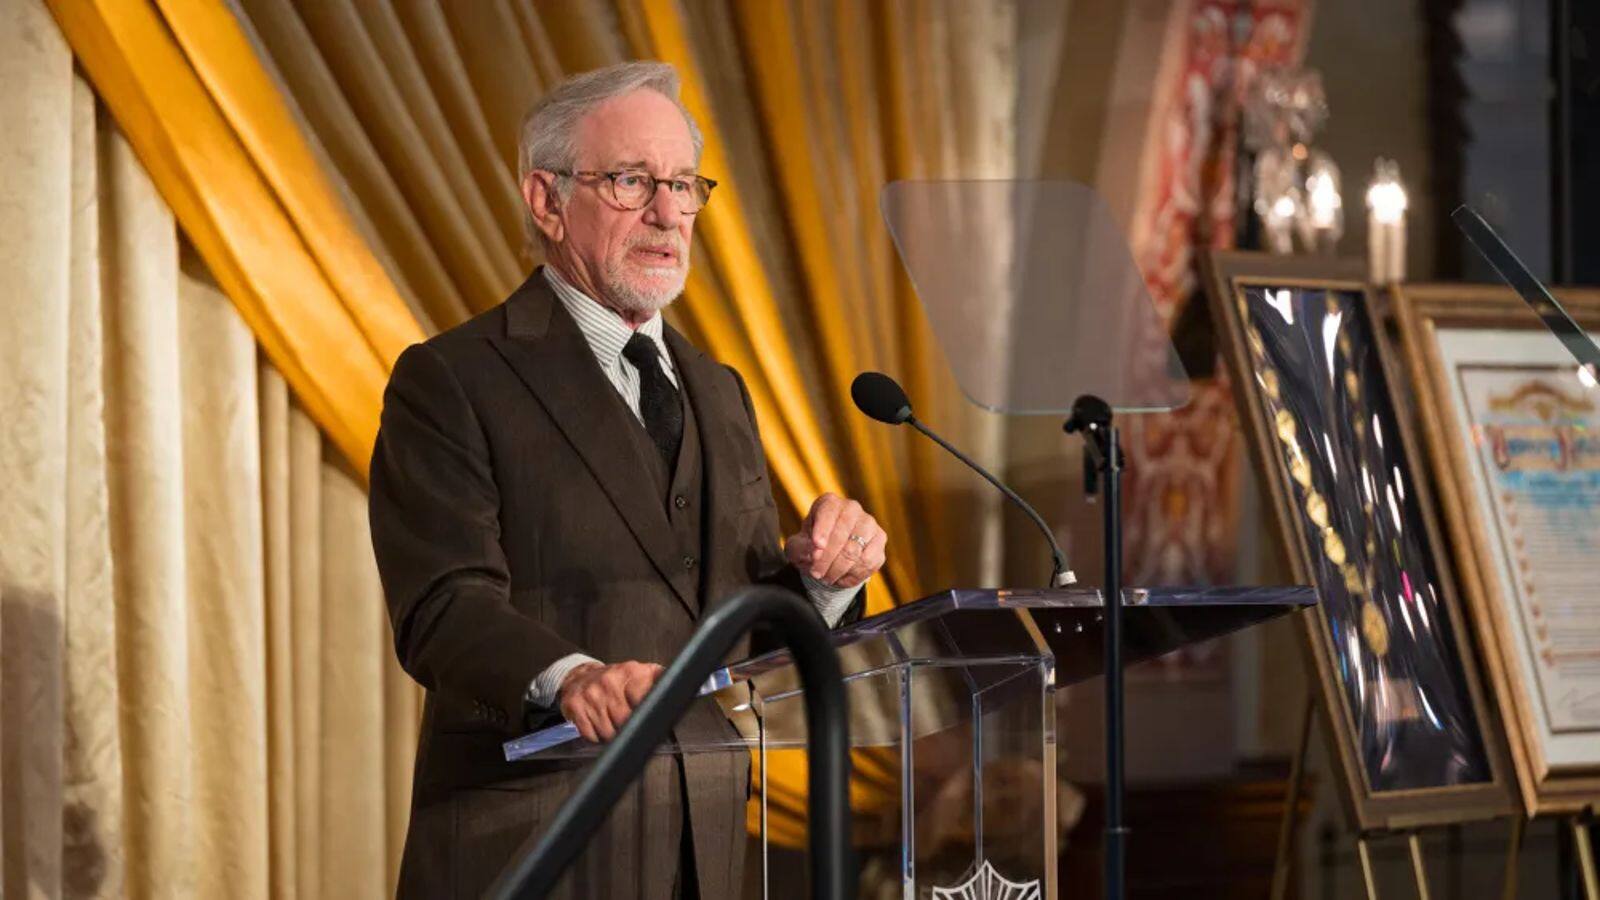 Steven Spielberg honored with USC Medallion by Holocaust survivor